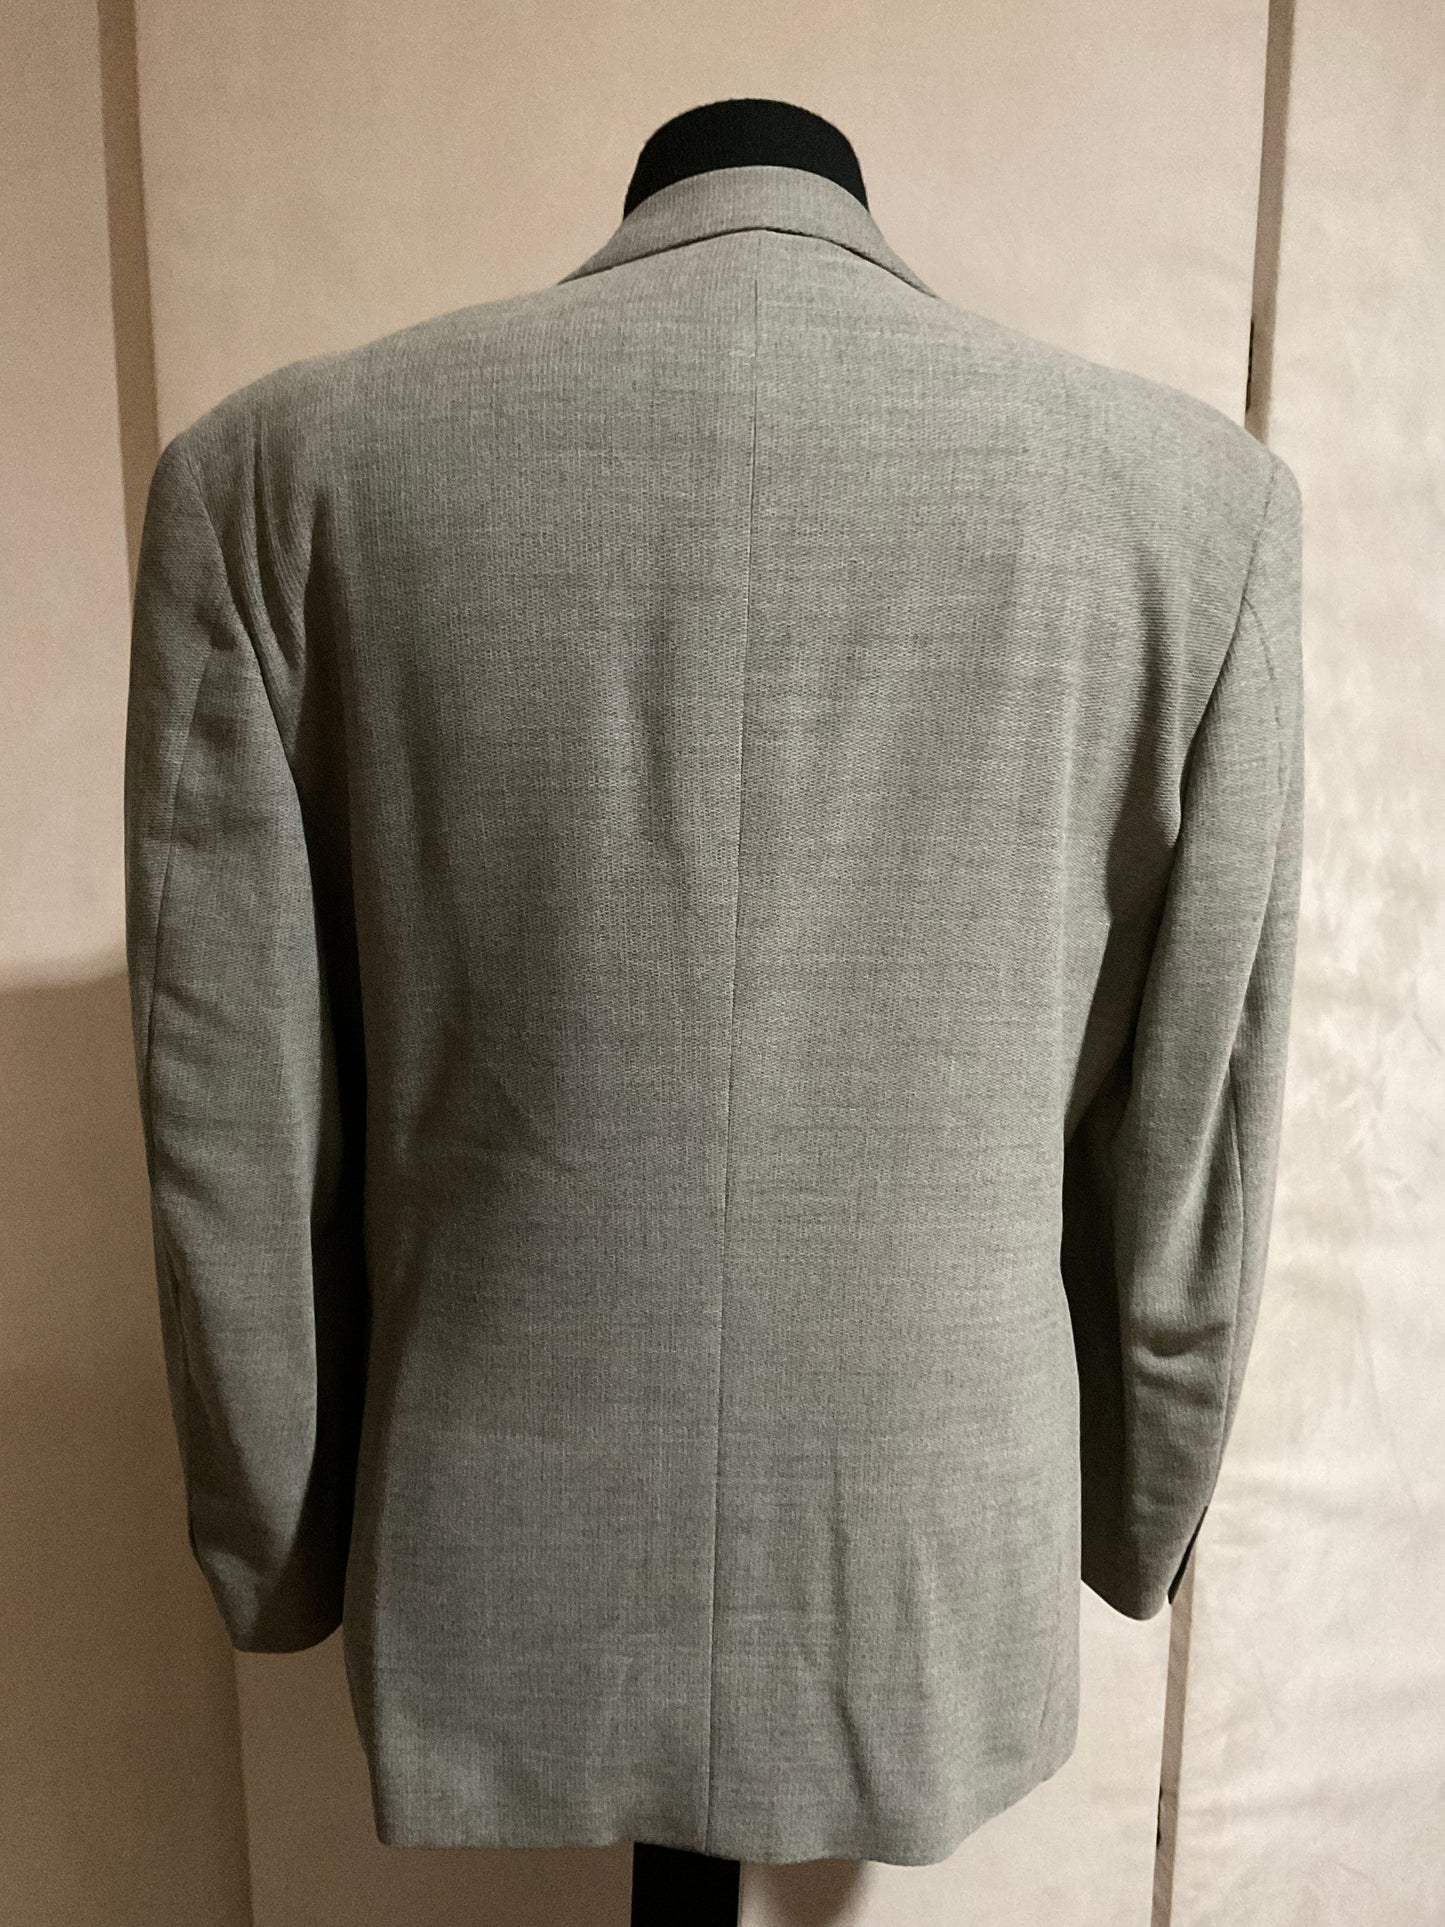 R P SPORT JACKET / TAUPE TEXTURE CREPE / 40 REG / NEW / MADE IN ITALY